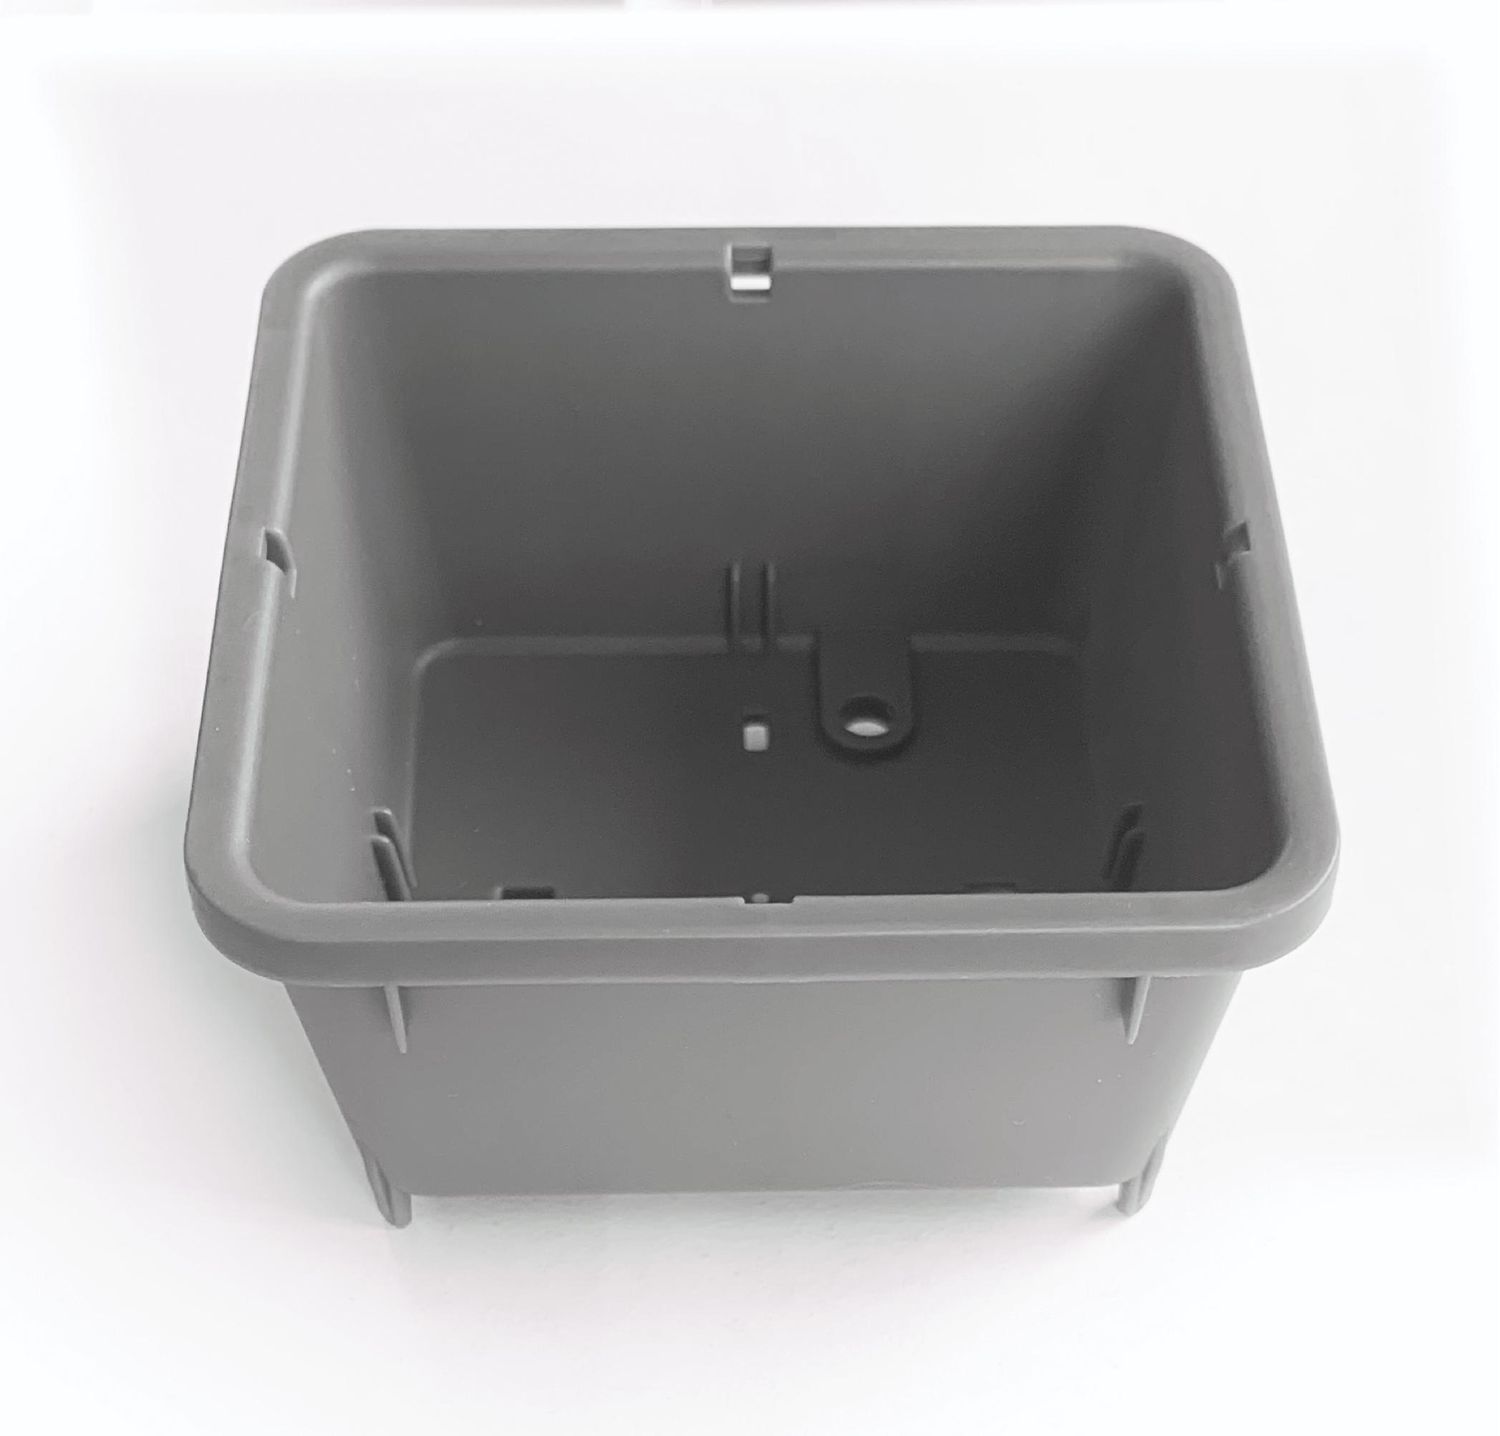 MTS51025 - Toolgrid™ 3" x 3" Container